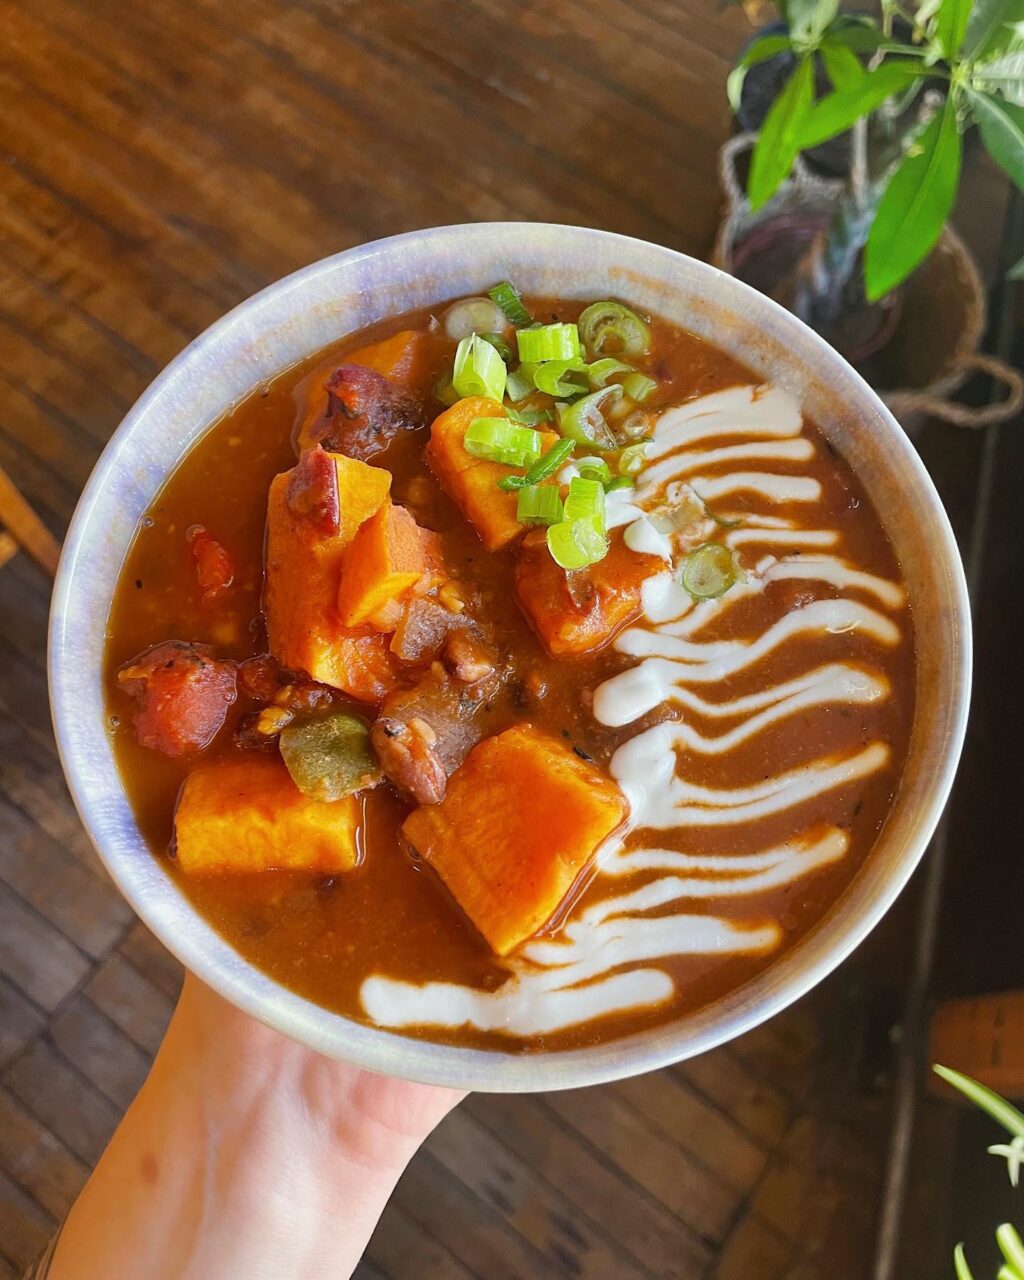 Hand holding a bowl of soup with chunks of sweet potato and white drizzled sauce